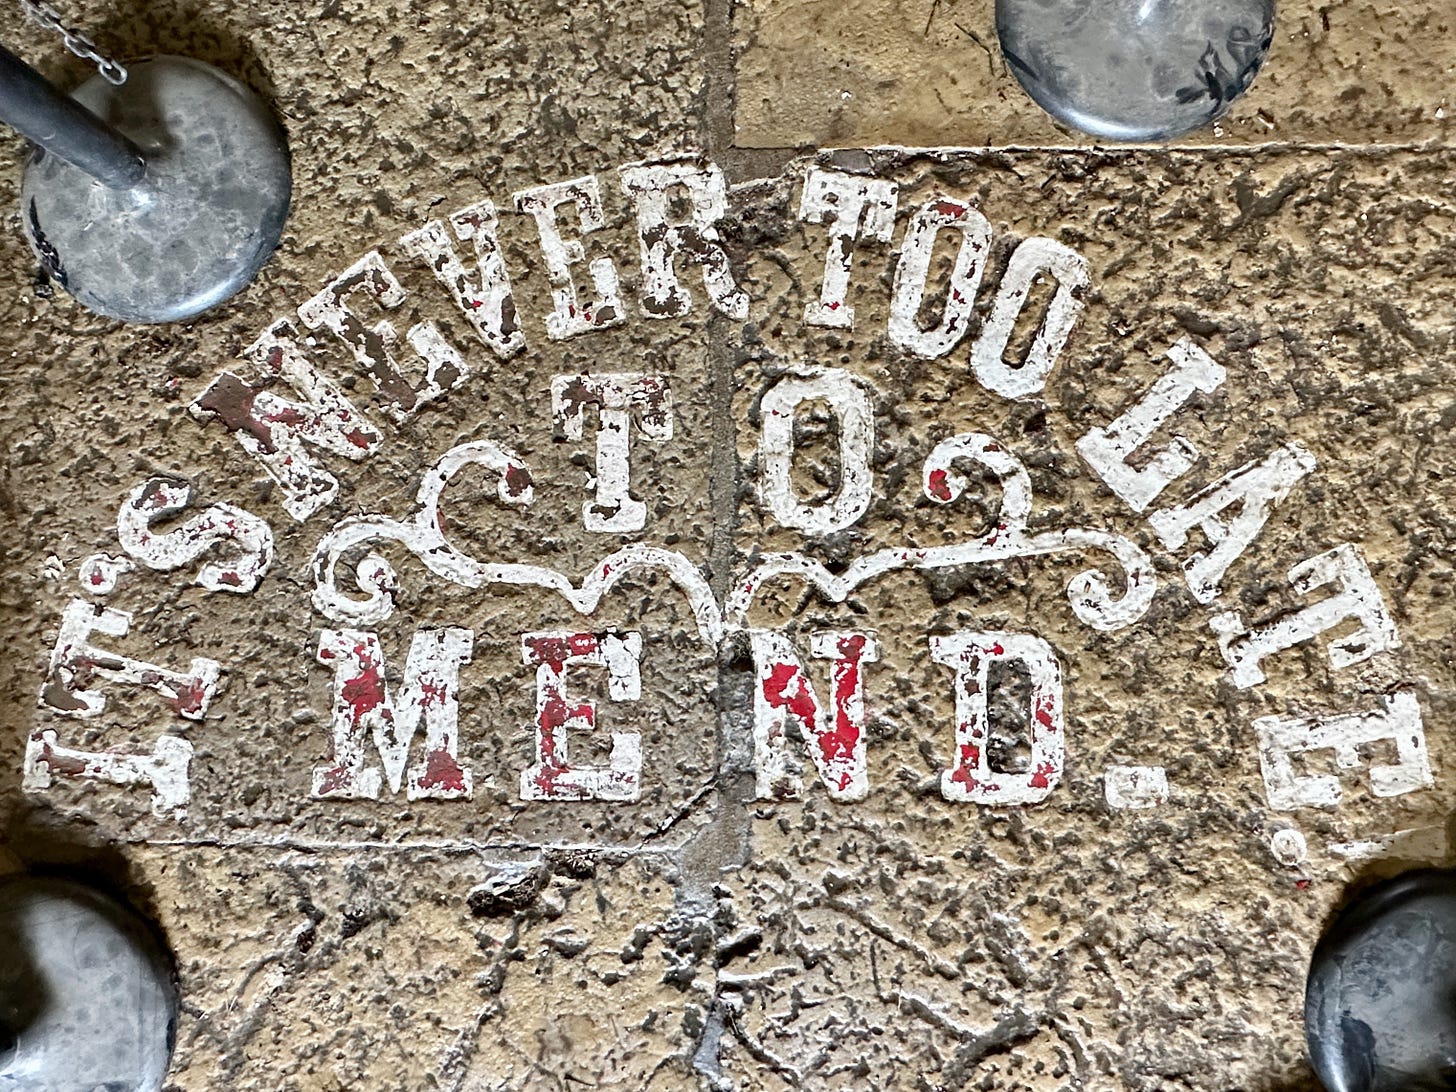 27 April 2024: This is on the floor near the entrance to the segregation (e.g. isolation, solitary confinement etc.) cell area. The words also appear in the final scene of the “Blues Brothers” film.